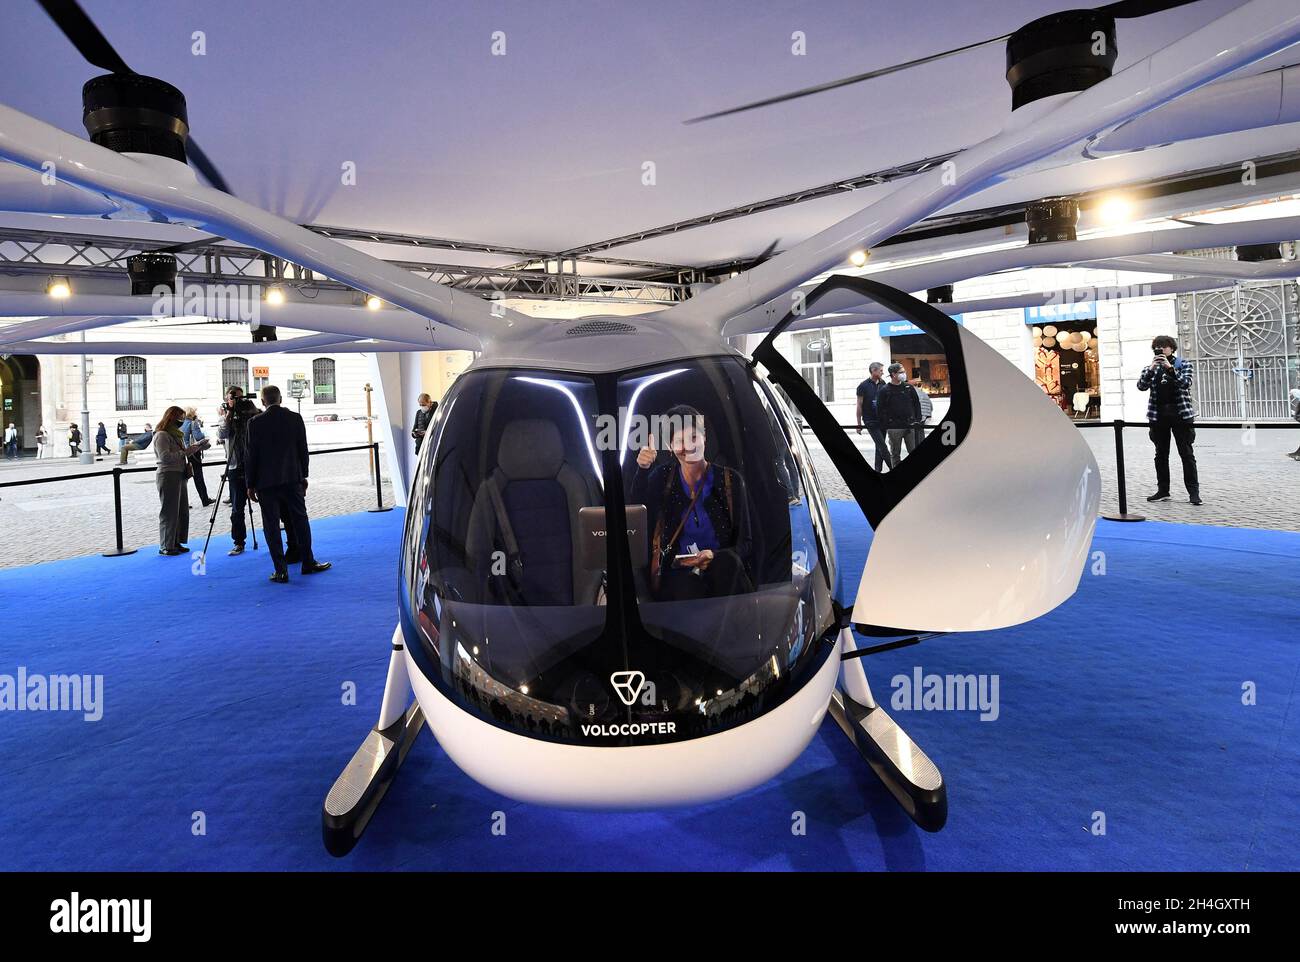 Rome, Italy on November 2, 2021. A VoloCity air taxi is exhibited in Rome, Italy on November 2, 2021. The new service will connect Rome s international airport with vertical airports across the city, reducing both traffic congestion and CO2 emissions. Rome is one of the first cities in Europe to commit to bringing urban air mobility services to its citizens with Volocopter. Paris has also committed to a collaboration to bring electric air taxis to the city in time for the 2024 Olympic Games. Urban air mobility will be part of the solution for heavily congested city centers across the world. As Stock Photo